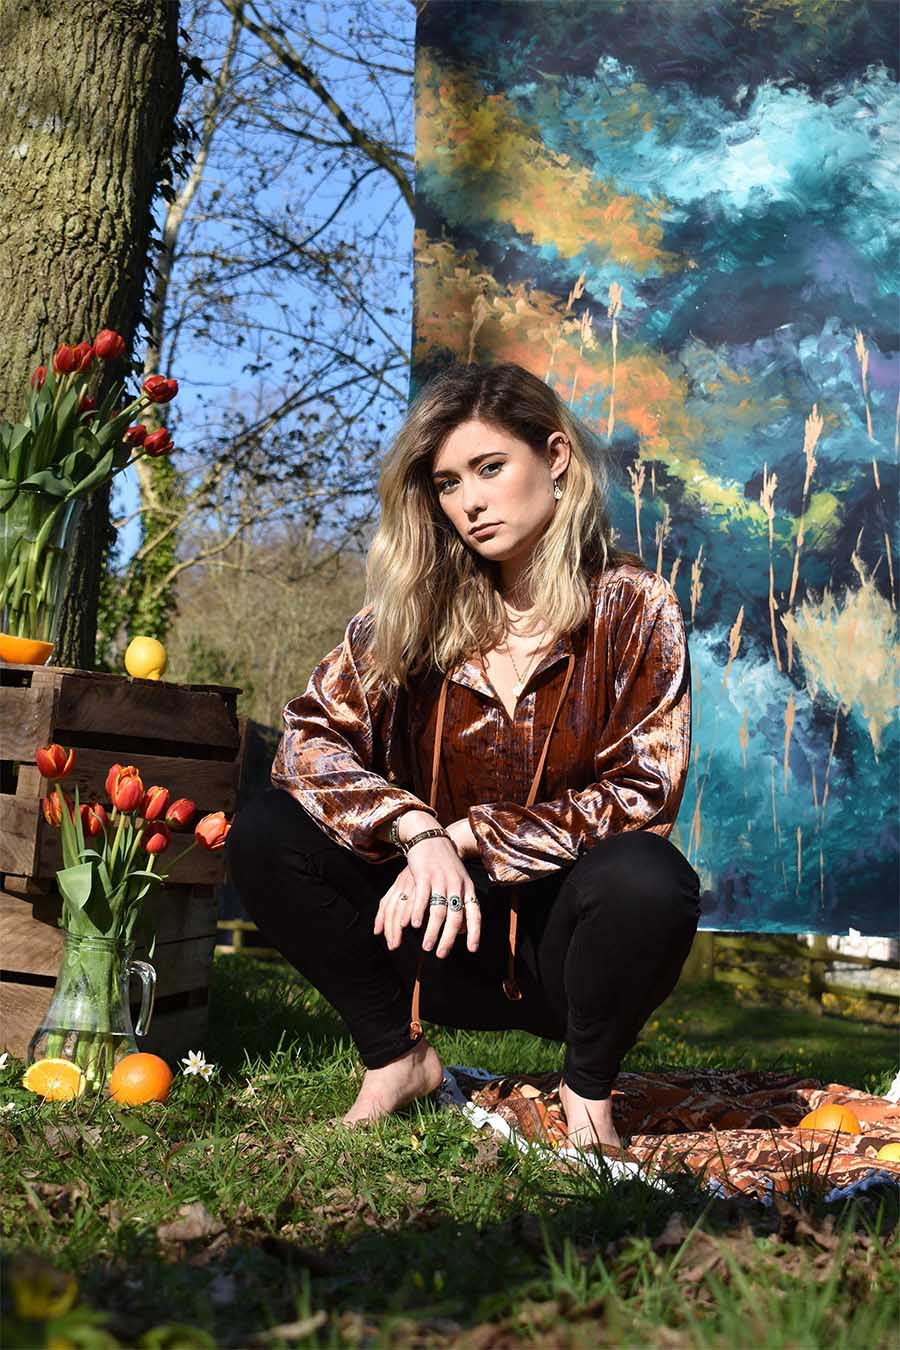 Model posing in a crouched position in front of a painted backdrop. She is surrounded by oranges and tulips.